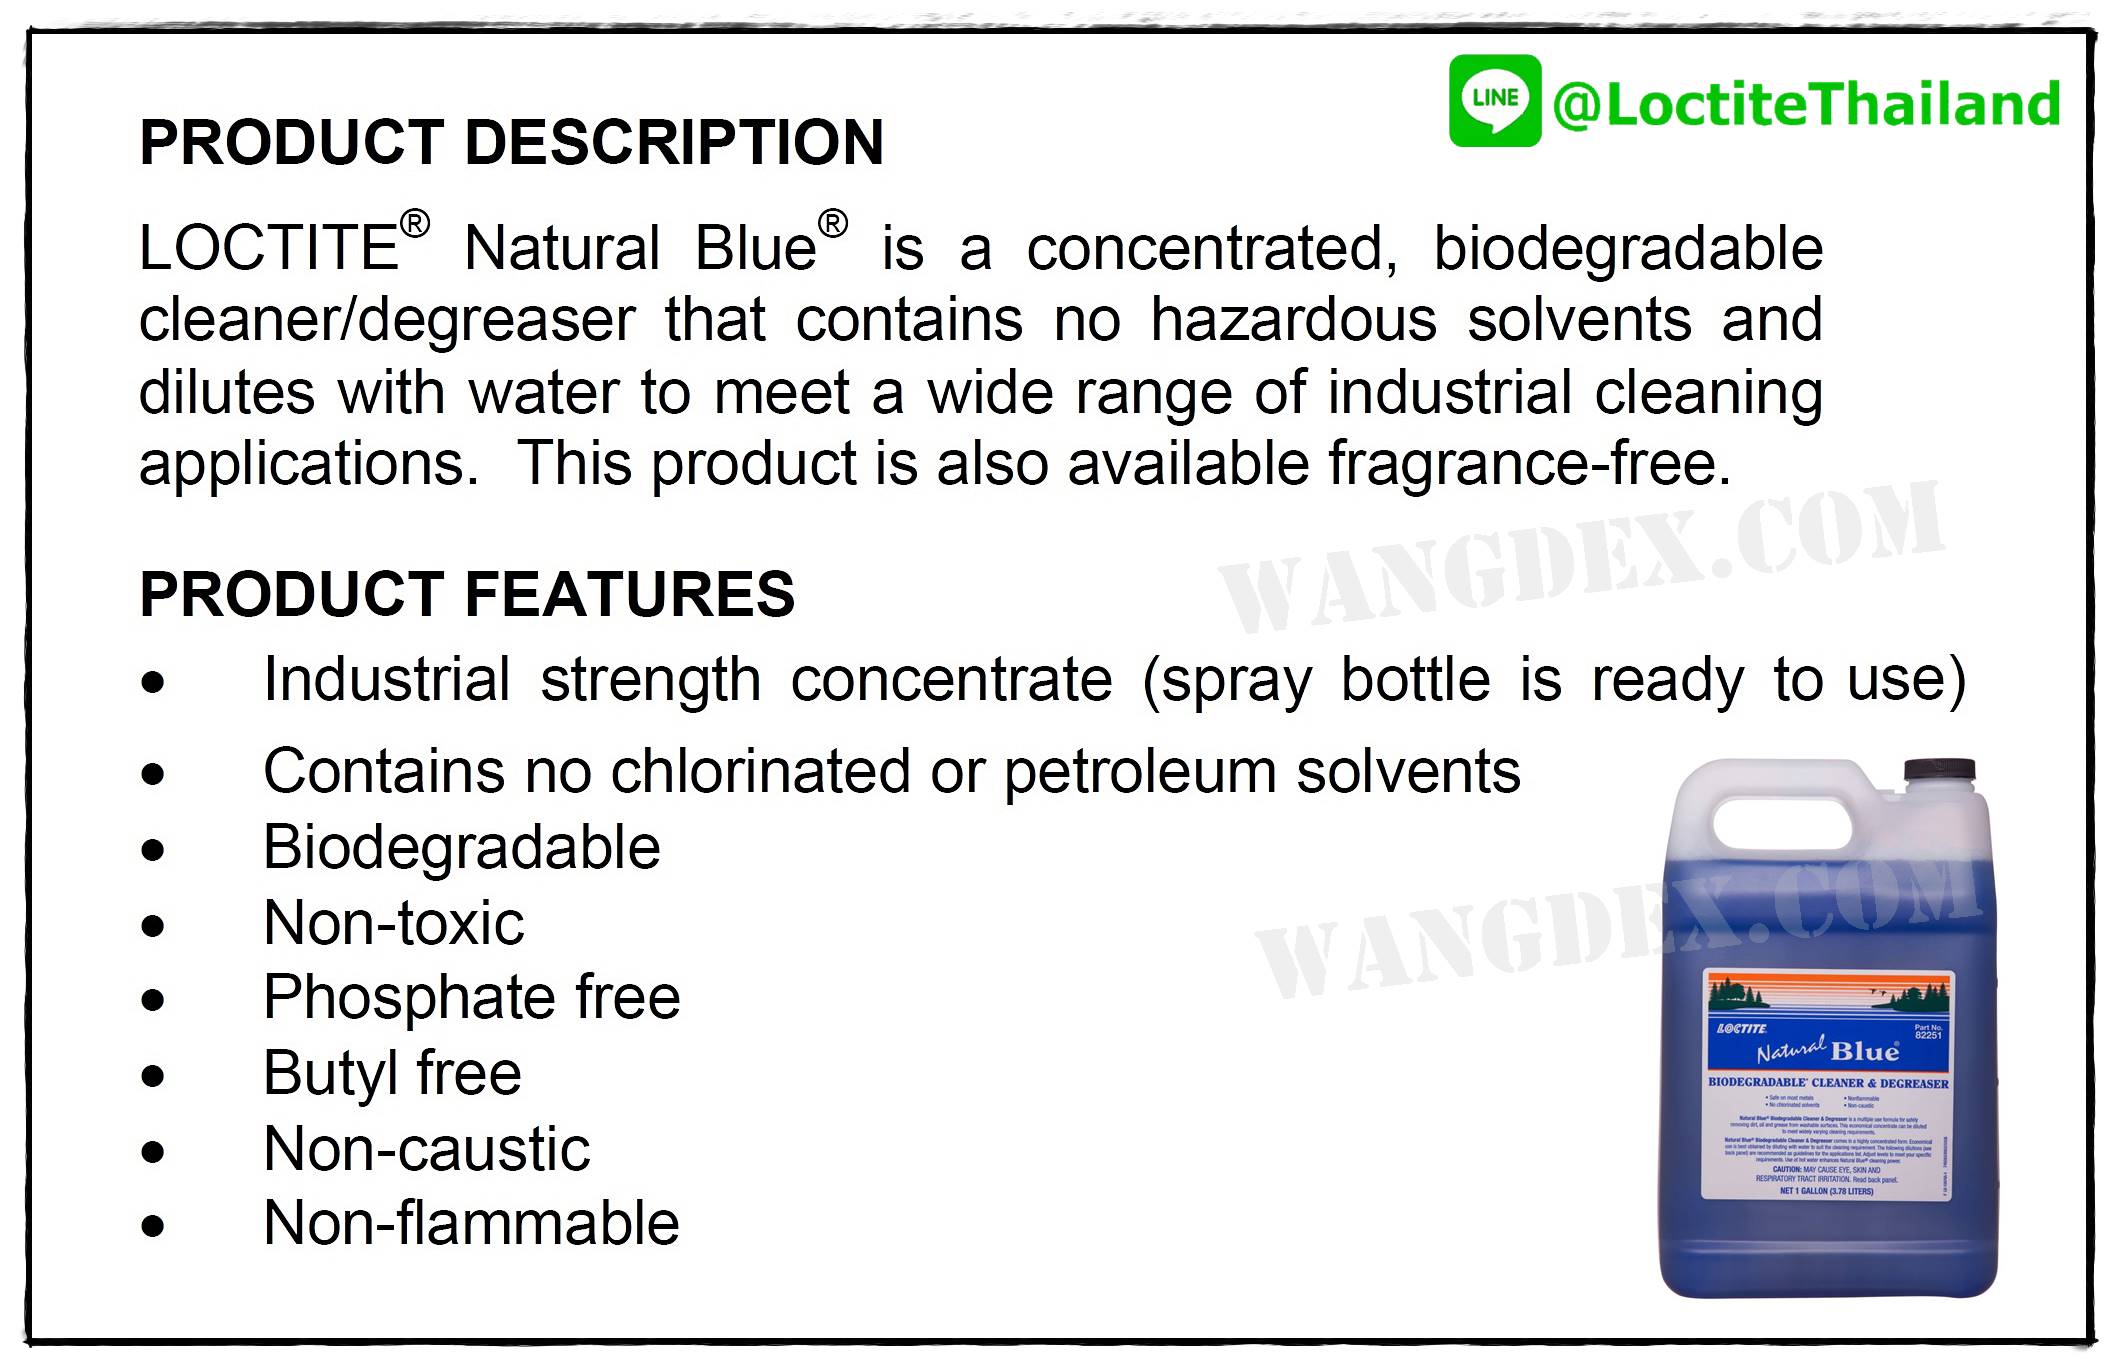 LOCTITE SF 7840 PARTS CLEANER